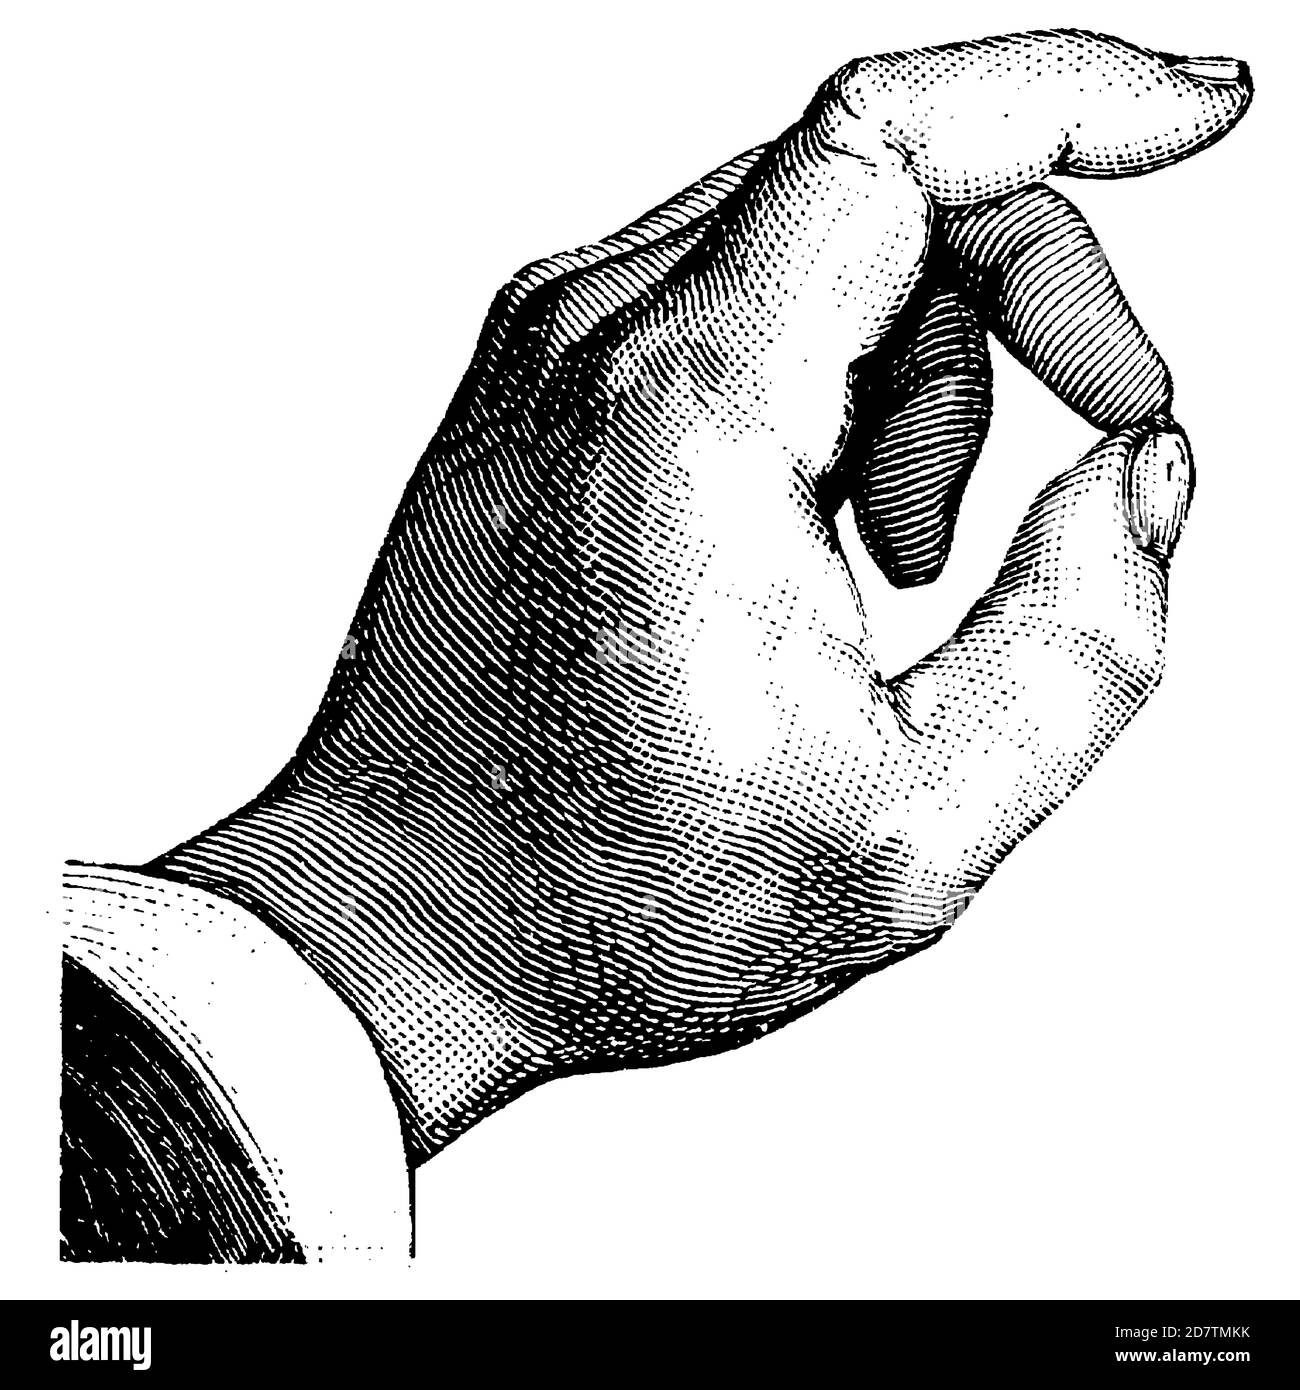 Hand illustration, 19th century black and white drawing Stock Photo